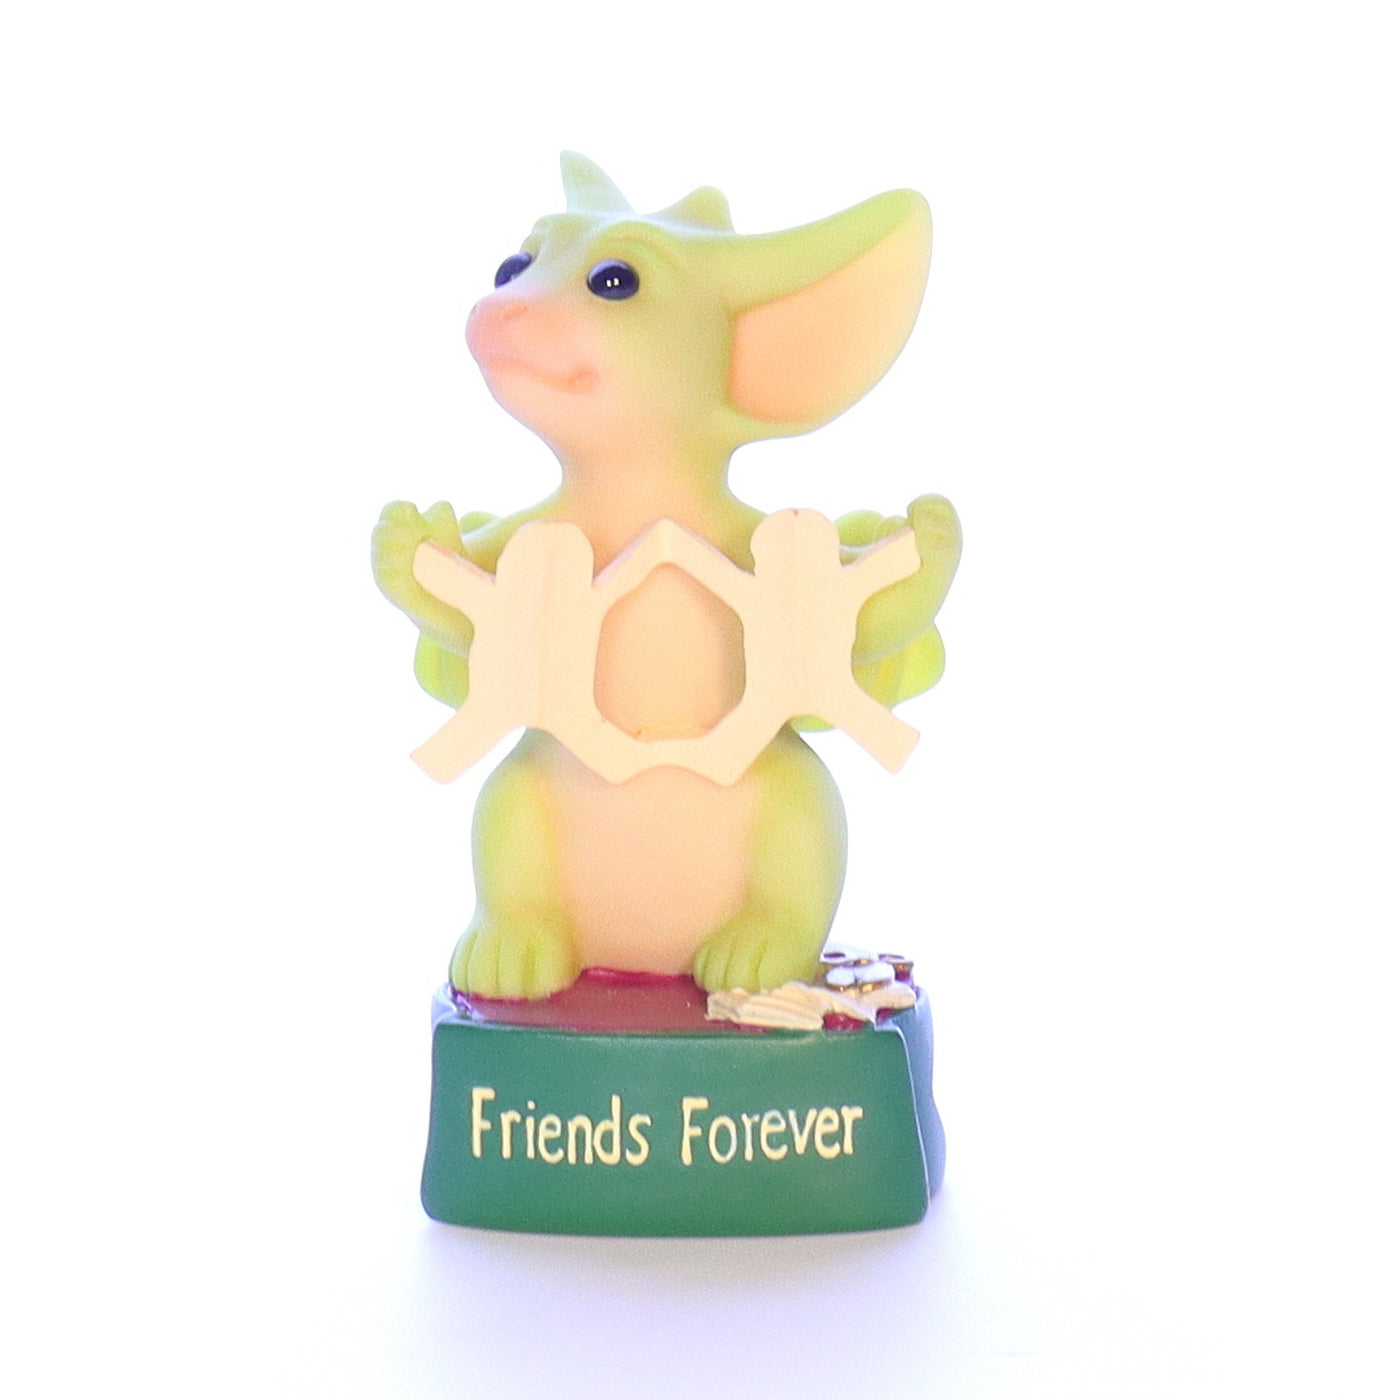 Whimsical_World_of_Pocket_Dragons_002982_Friends_Forever_Fantasy_Figurine_2001_Box Front View